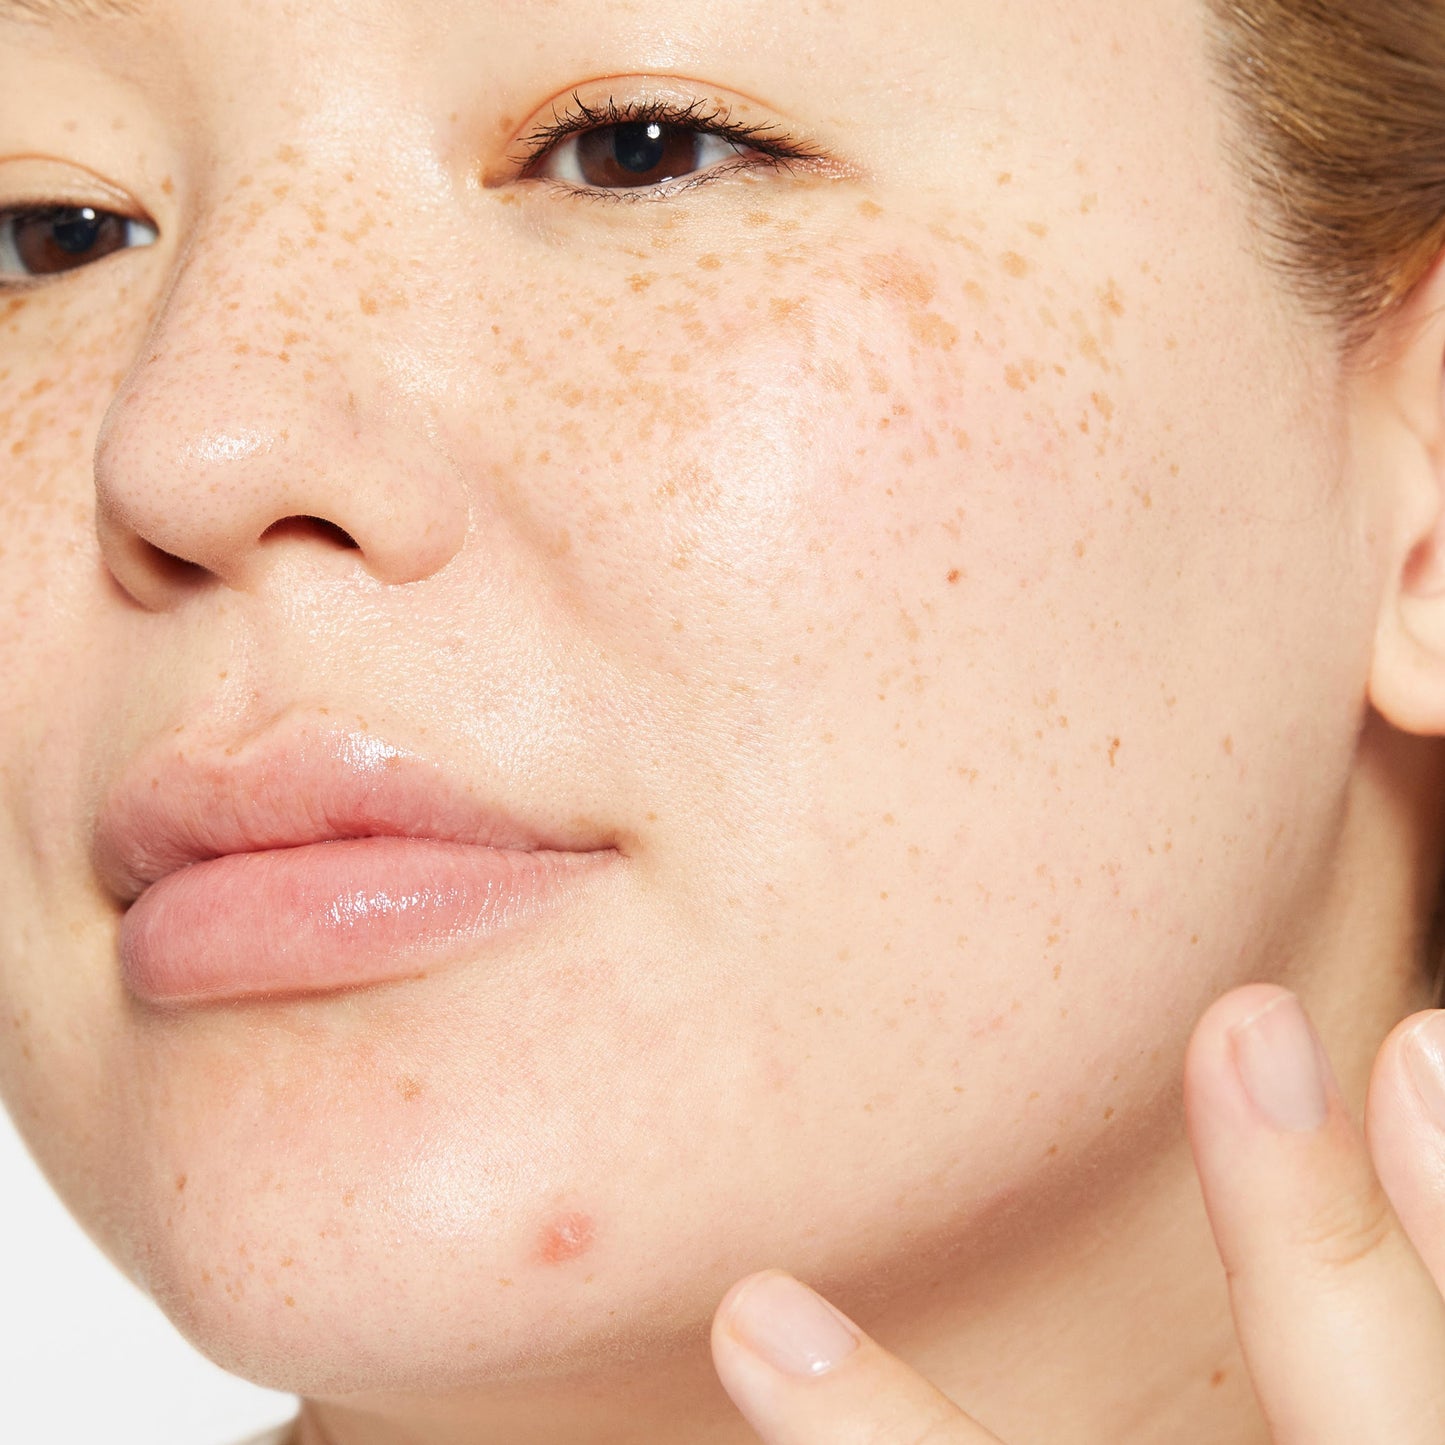 There's A Difference Between Spots And Acne? – Dermalogica UK